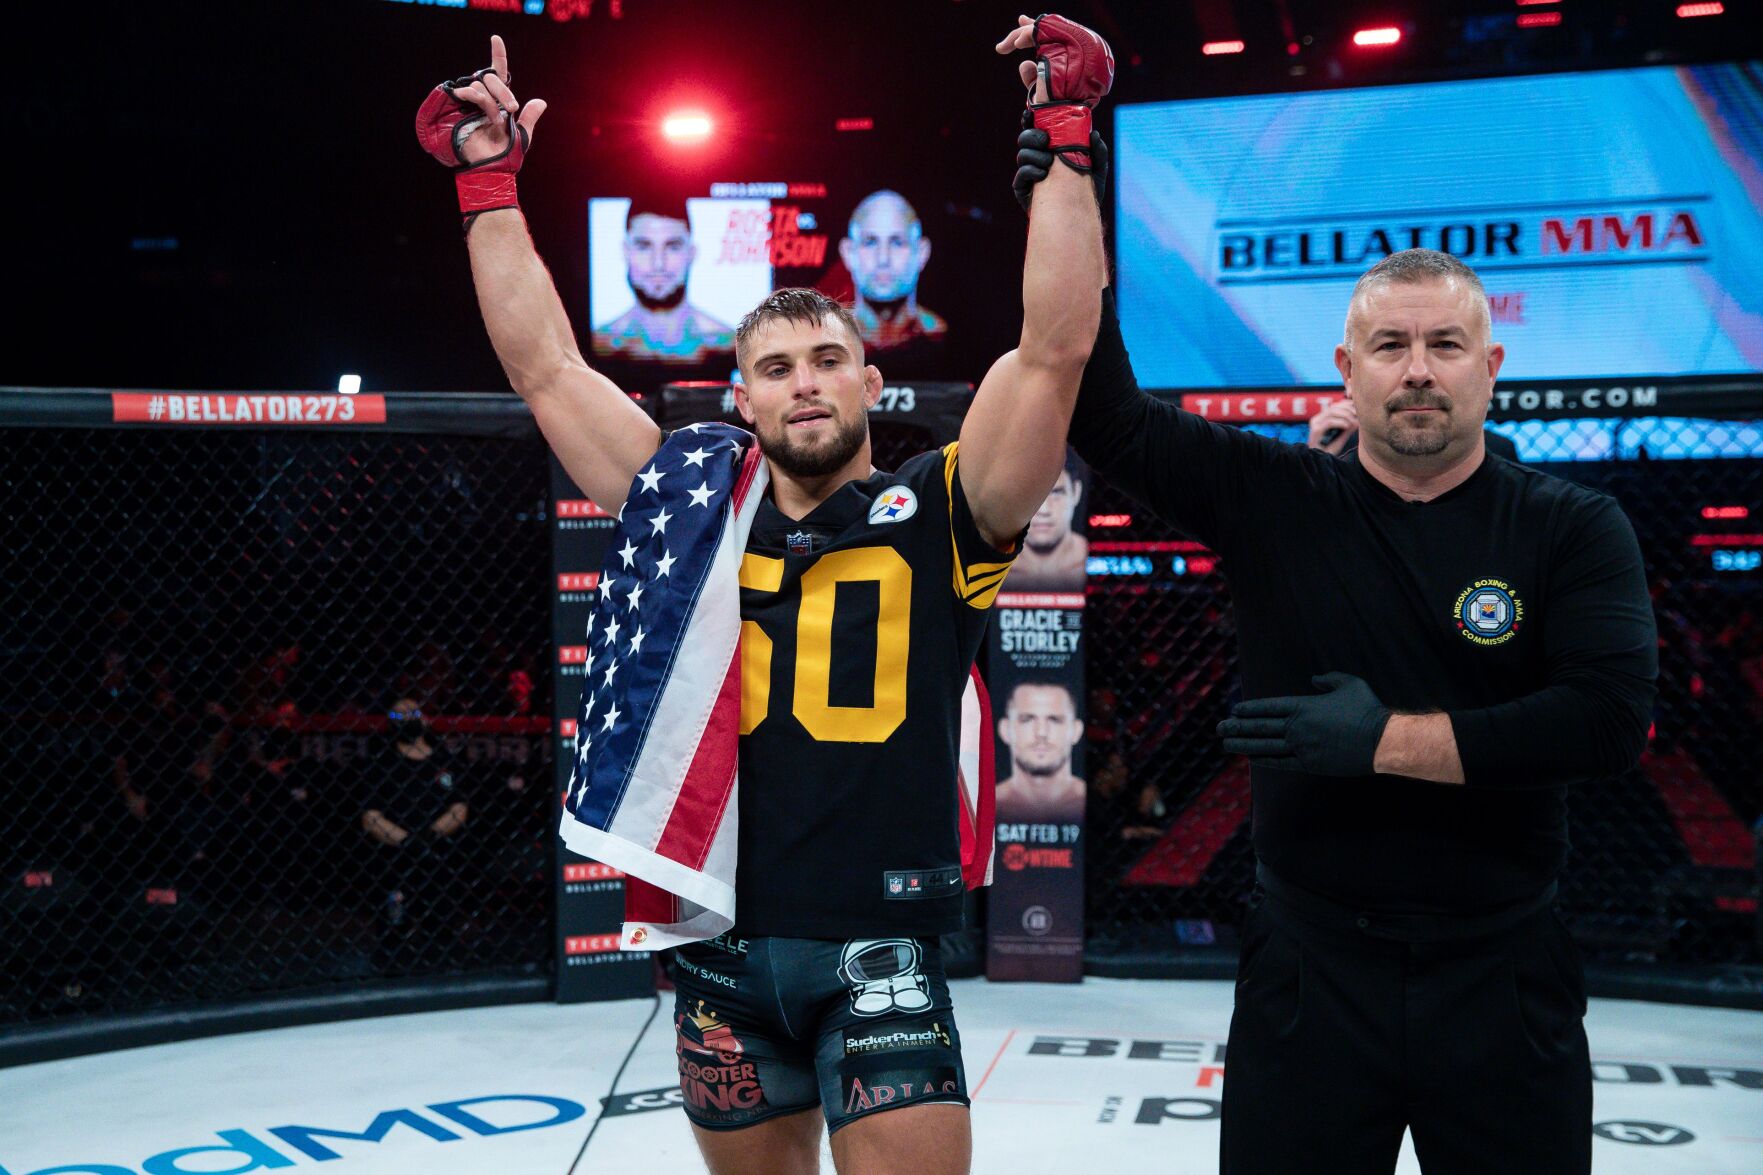 Rosta remains undefeated at Bellator 283 preliminary round Sports ncnewsonline